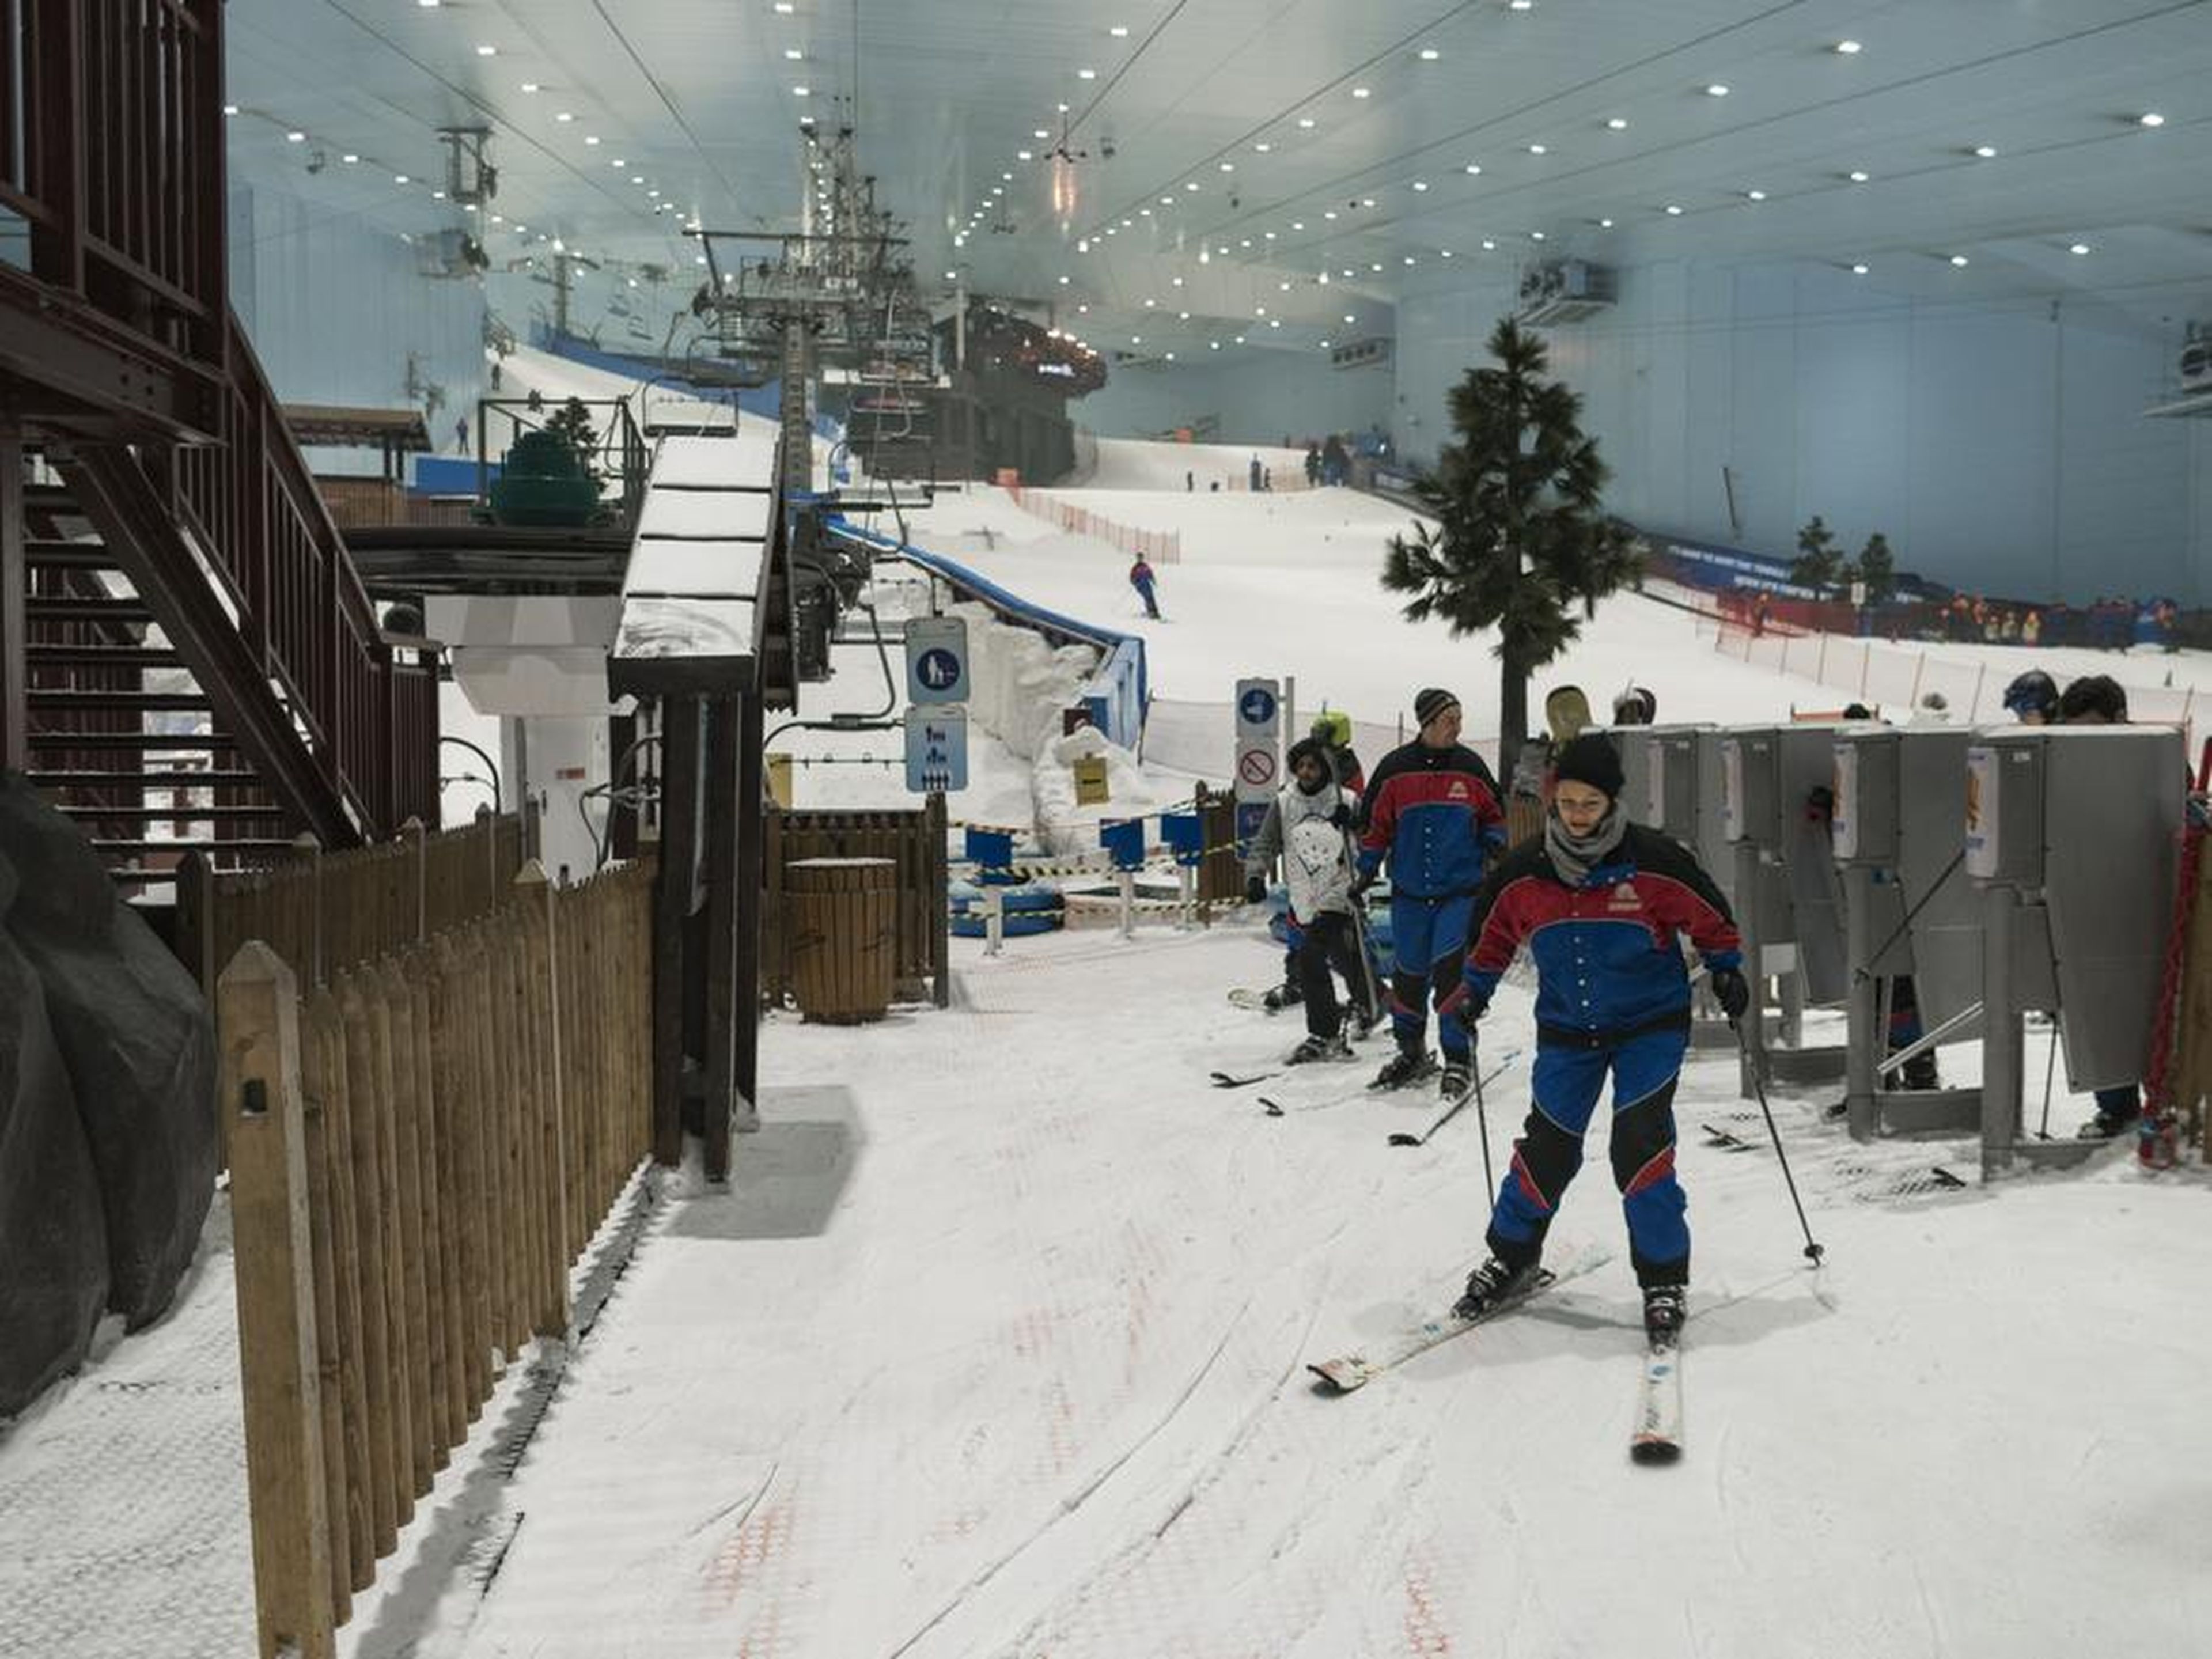 "Shopping mecca of the Middle East and haven for foreigners and expats. Where else can you ski inside a mall in 90 degree heat? But, guess what? The whole place is fake! Get a real life, go to a real mountain, and ski in real